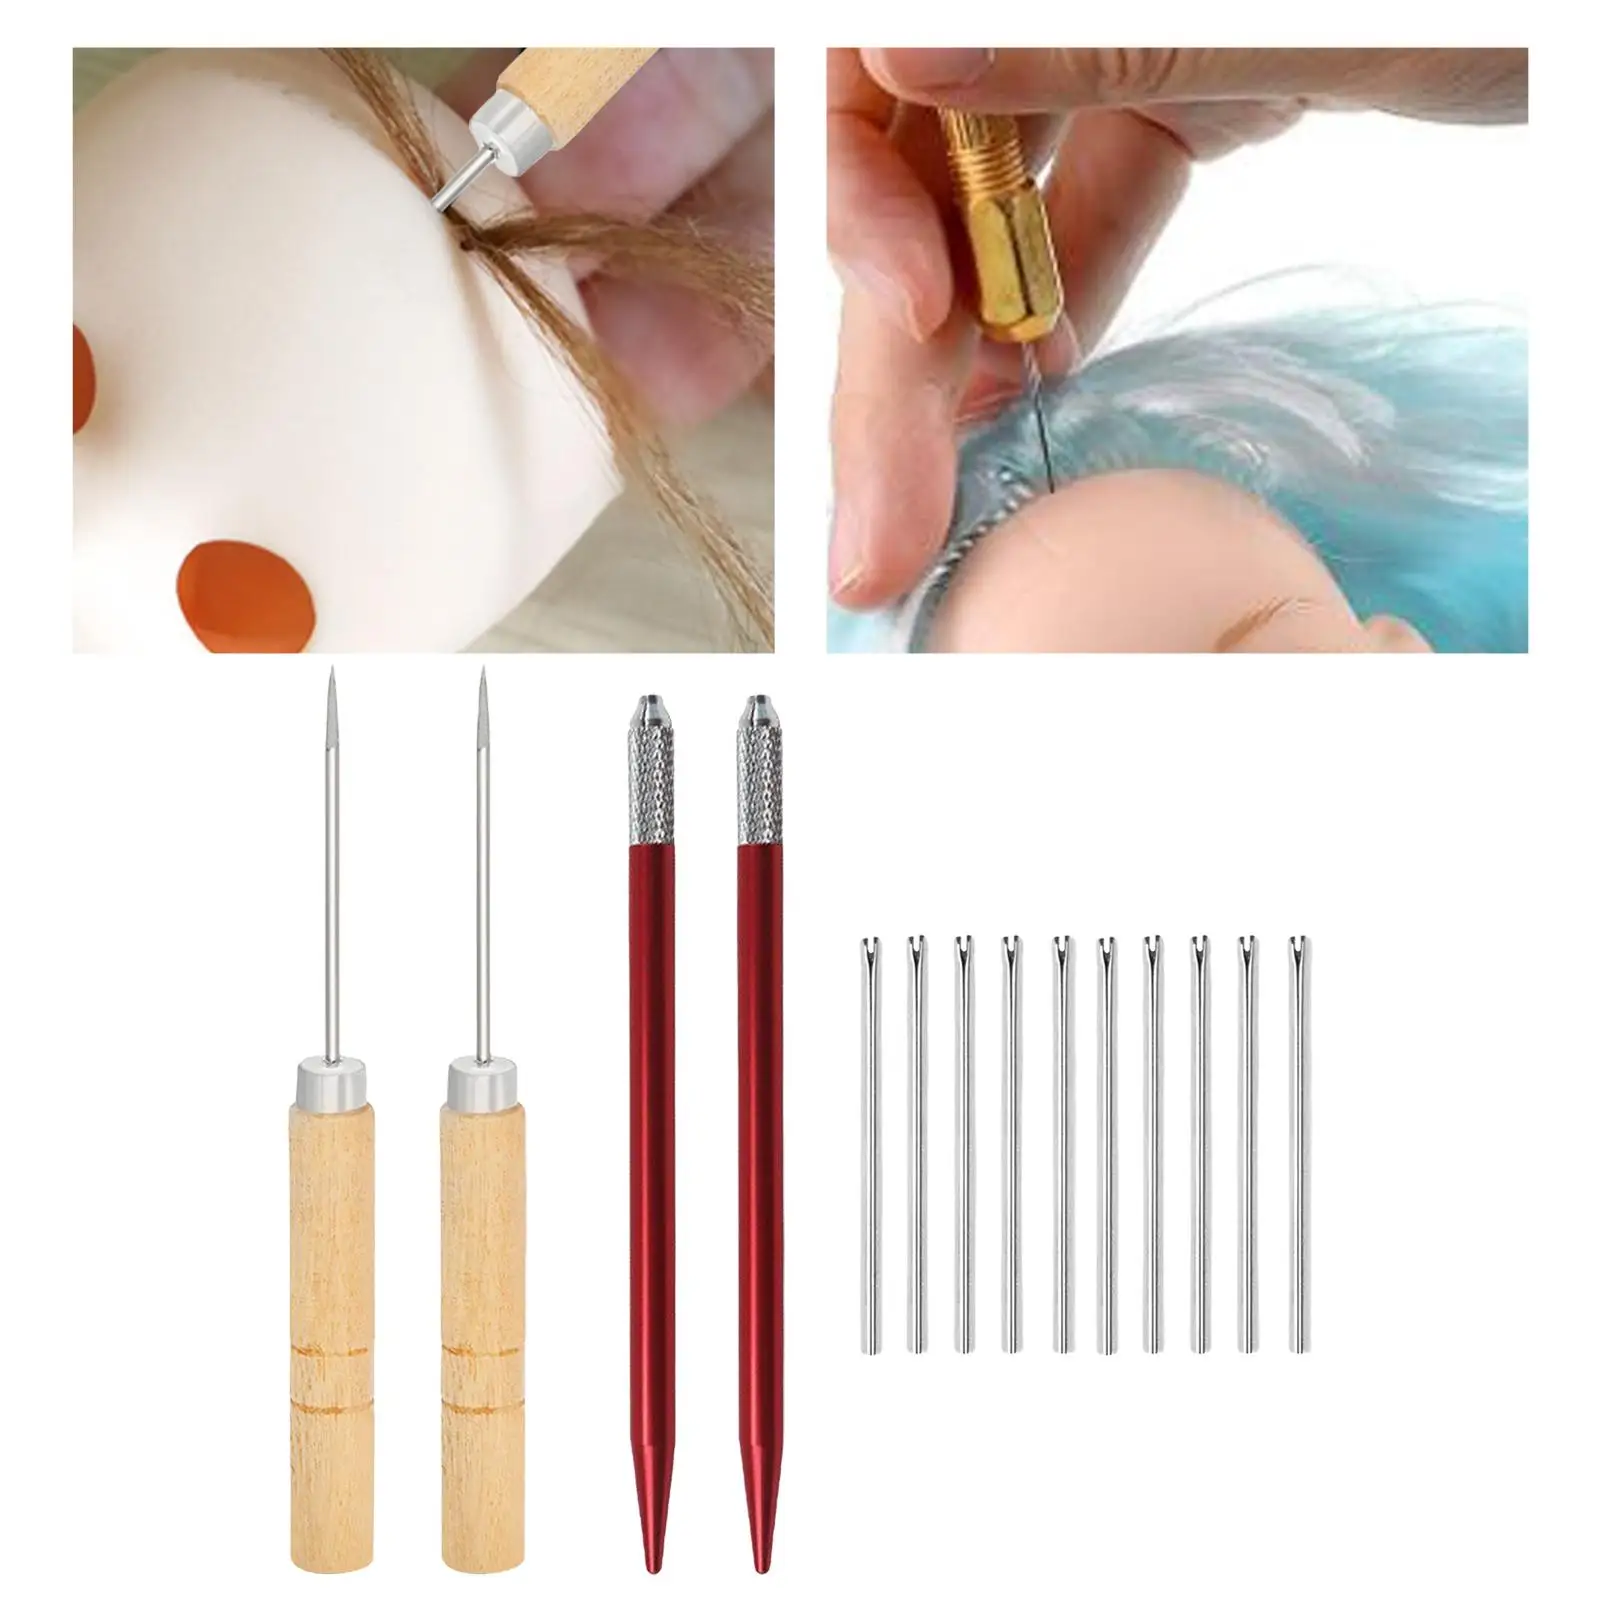 Doll Rerooting Tools with Needles Doll Making Kit for DIY Doll Handle Felting Beginners Curler Transplant